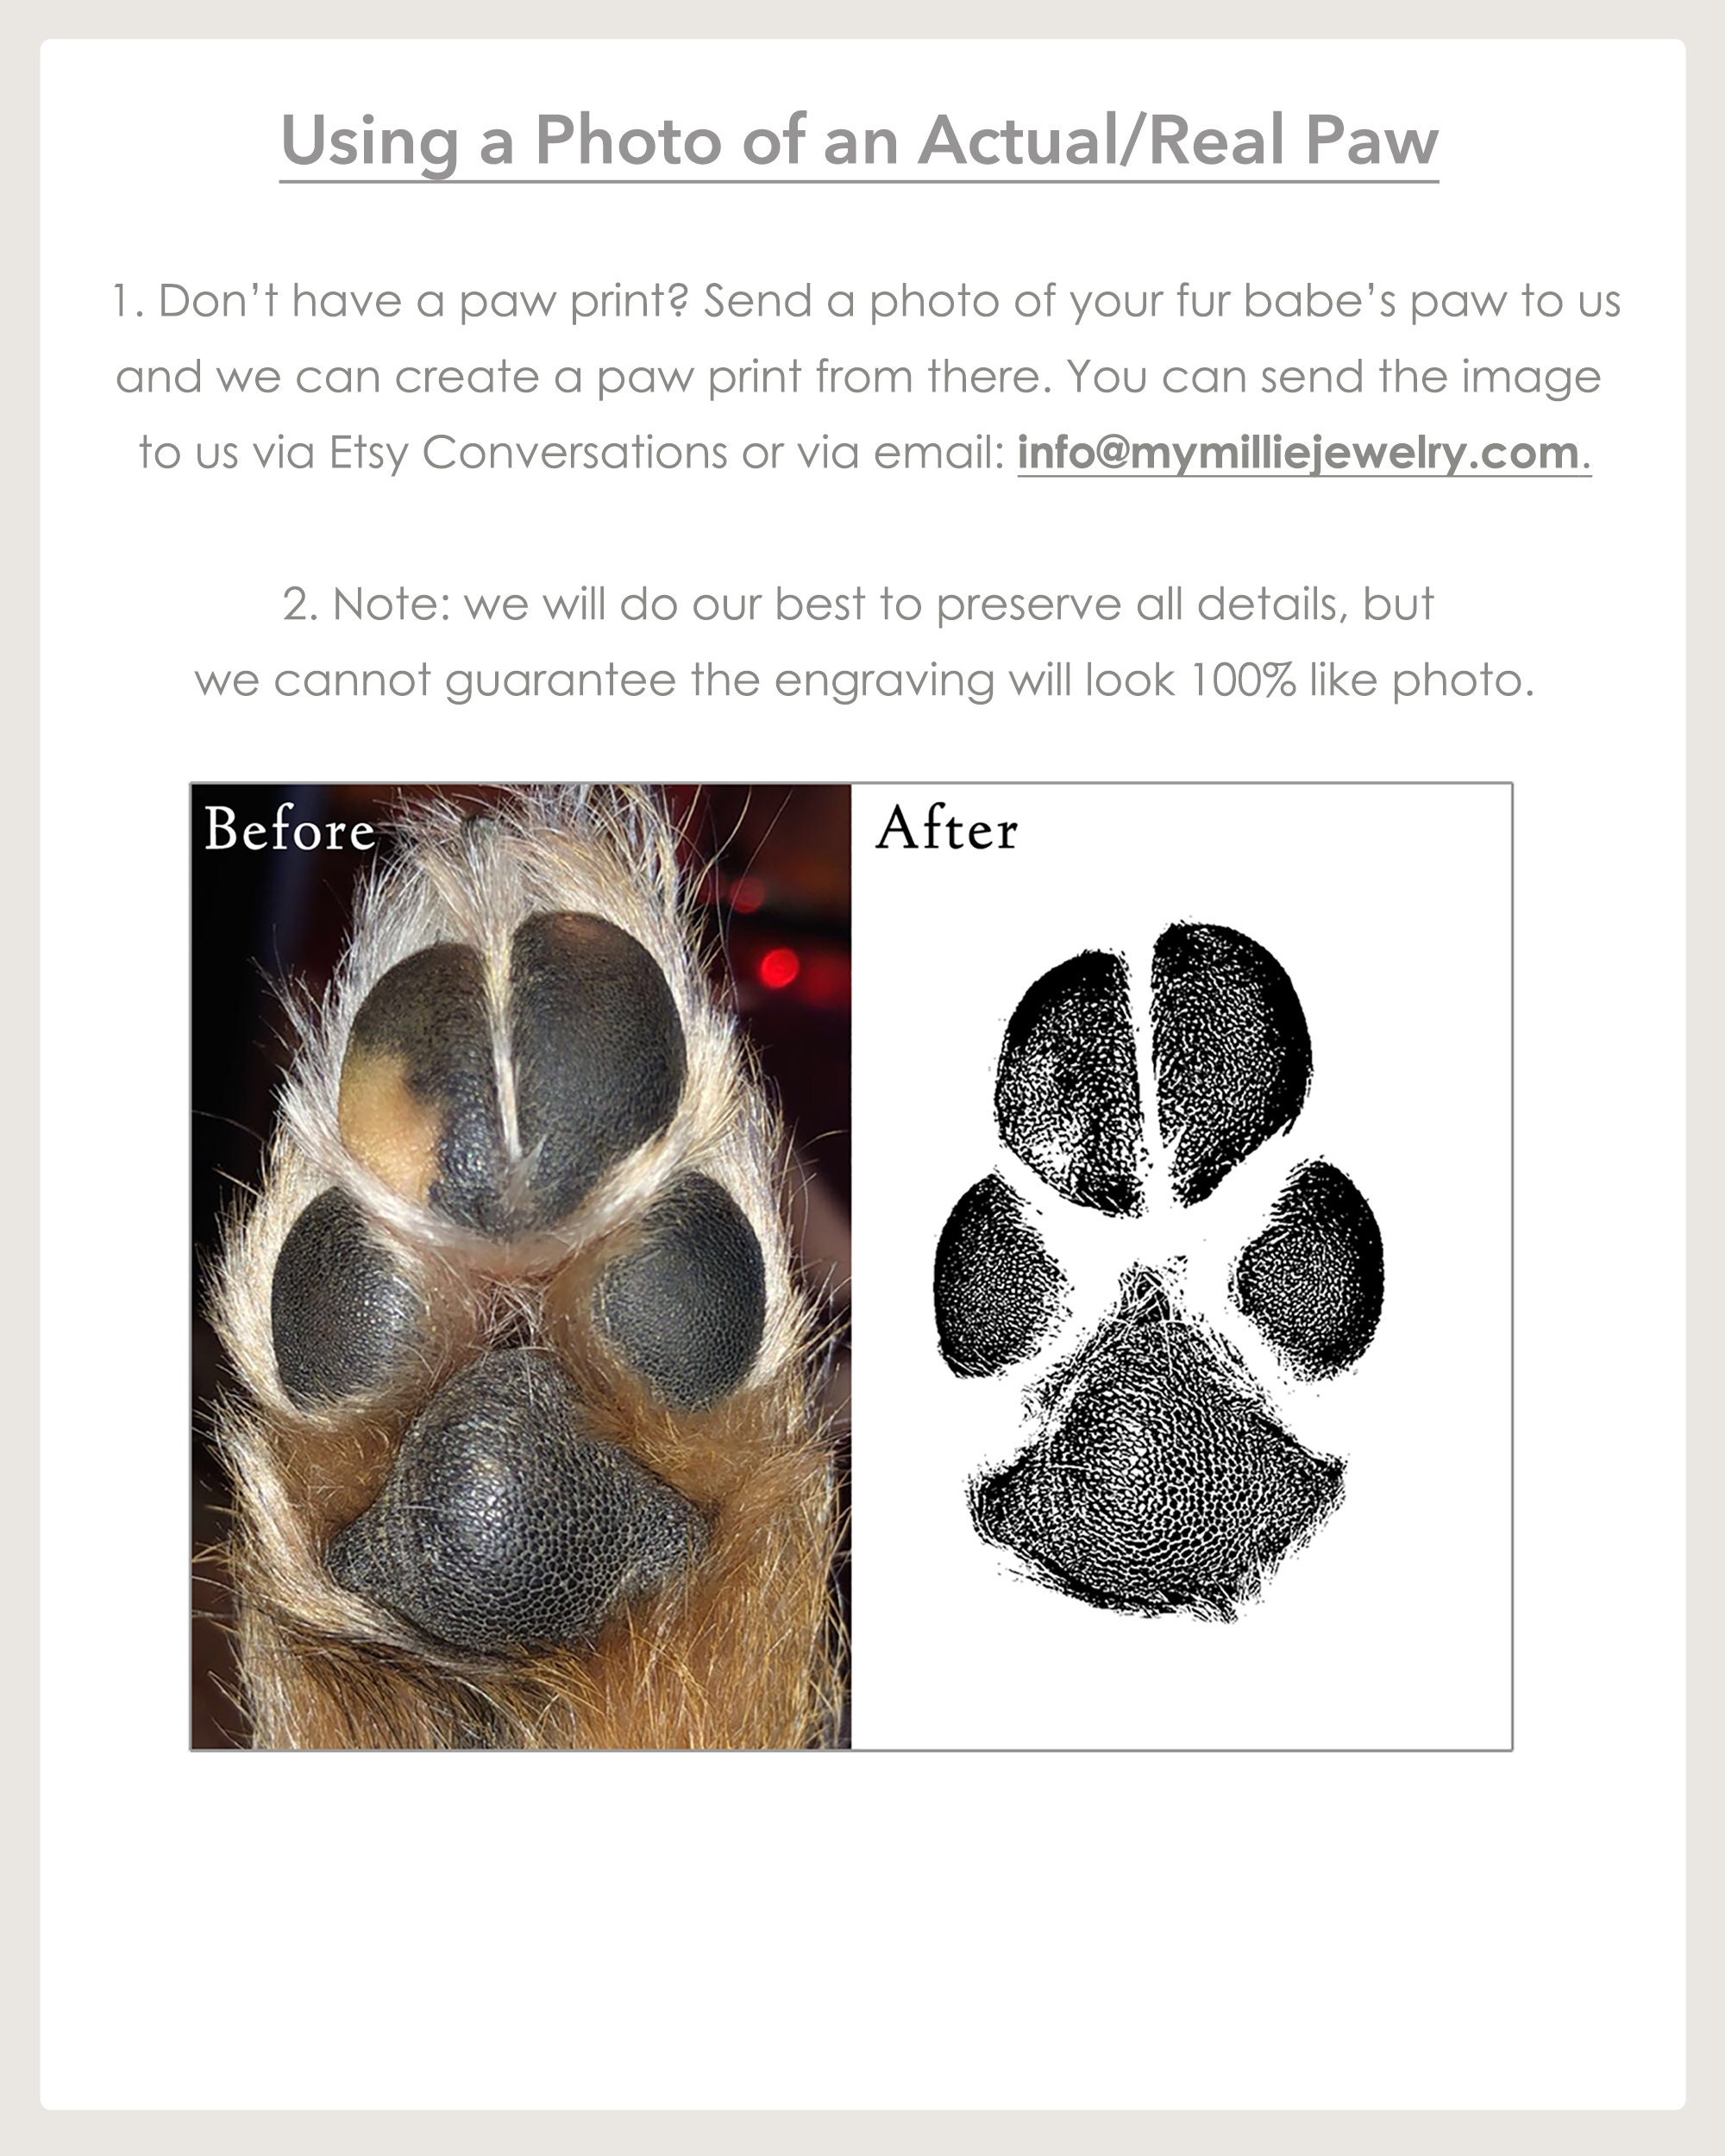 Paw Print Editing Fees for Photos of Actual Paws 